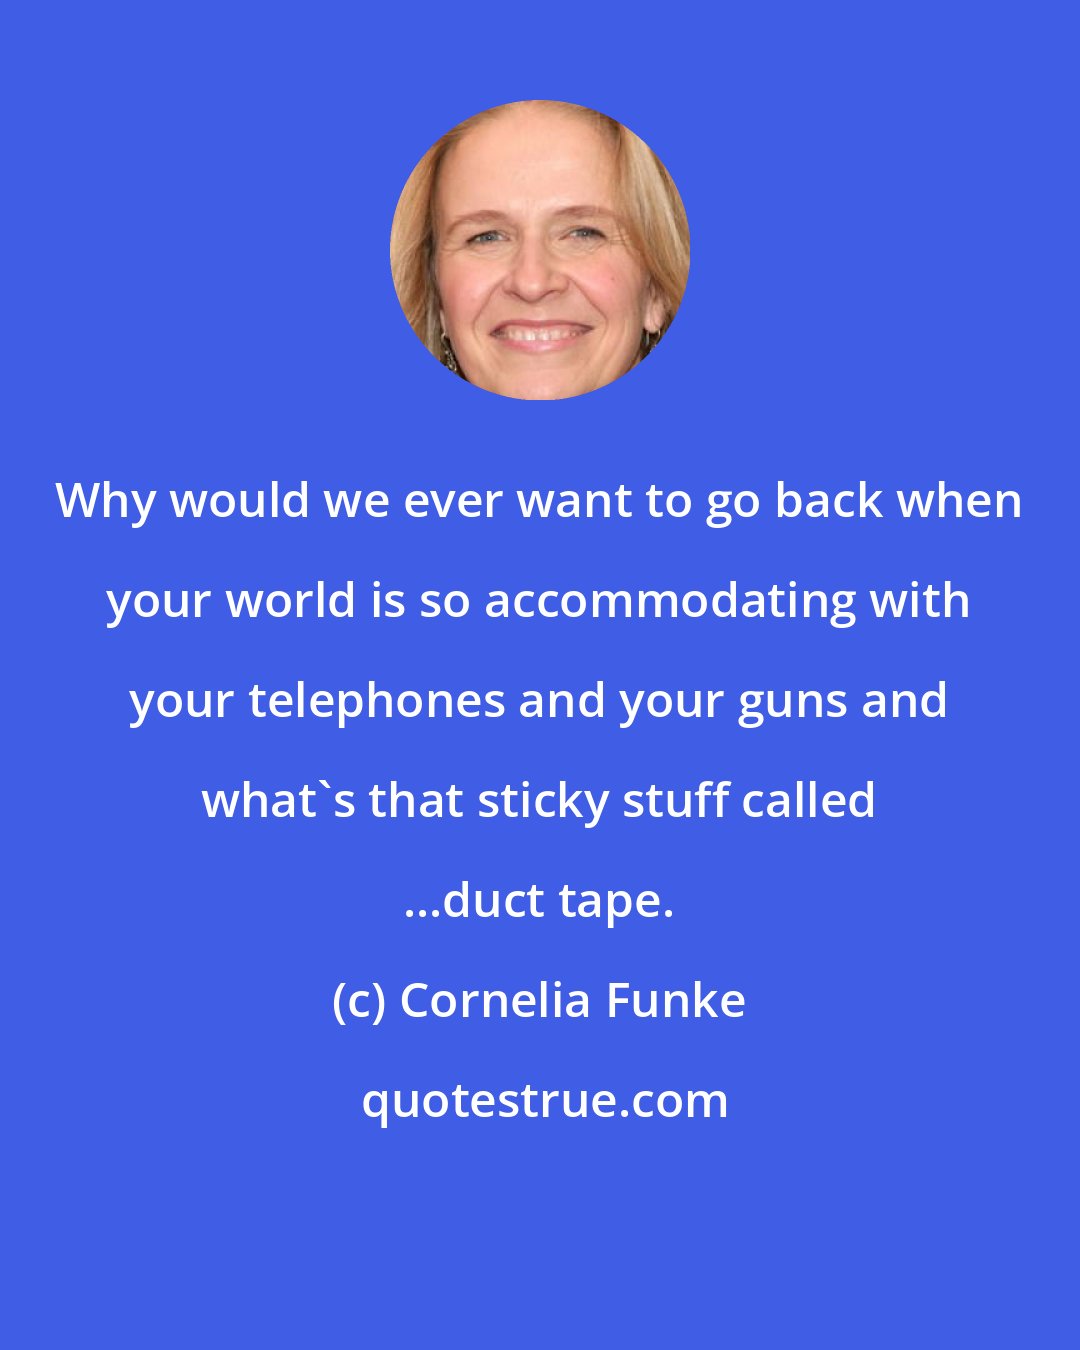 Cornelia Funke: Why would we ever want to go back when your world is so accommodating with your telephones and your guns and what's that sticky stuff called ...duct tape.